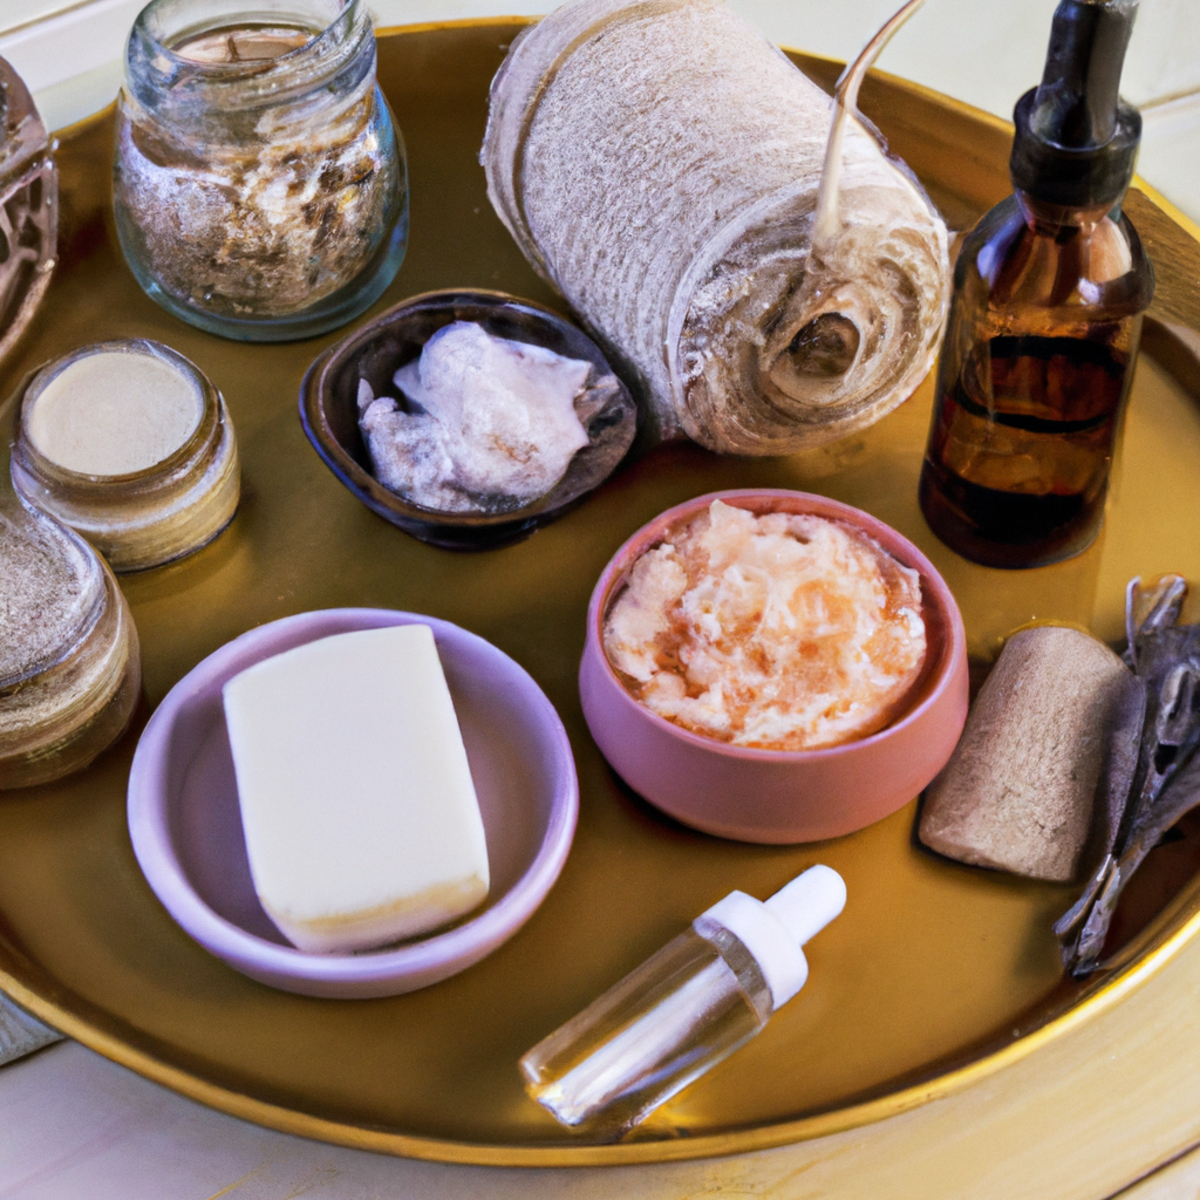 Get ready to glow with these natural skin care routines - a heavenly blend of shea butter, coconut oil, jojoba oil, and rosehip oil, topped off with a touch of lavender essential oil and a wooden comb for the ultimate self-care experience.